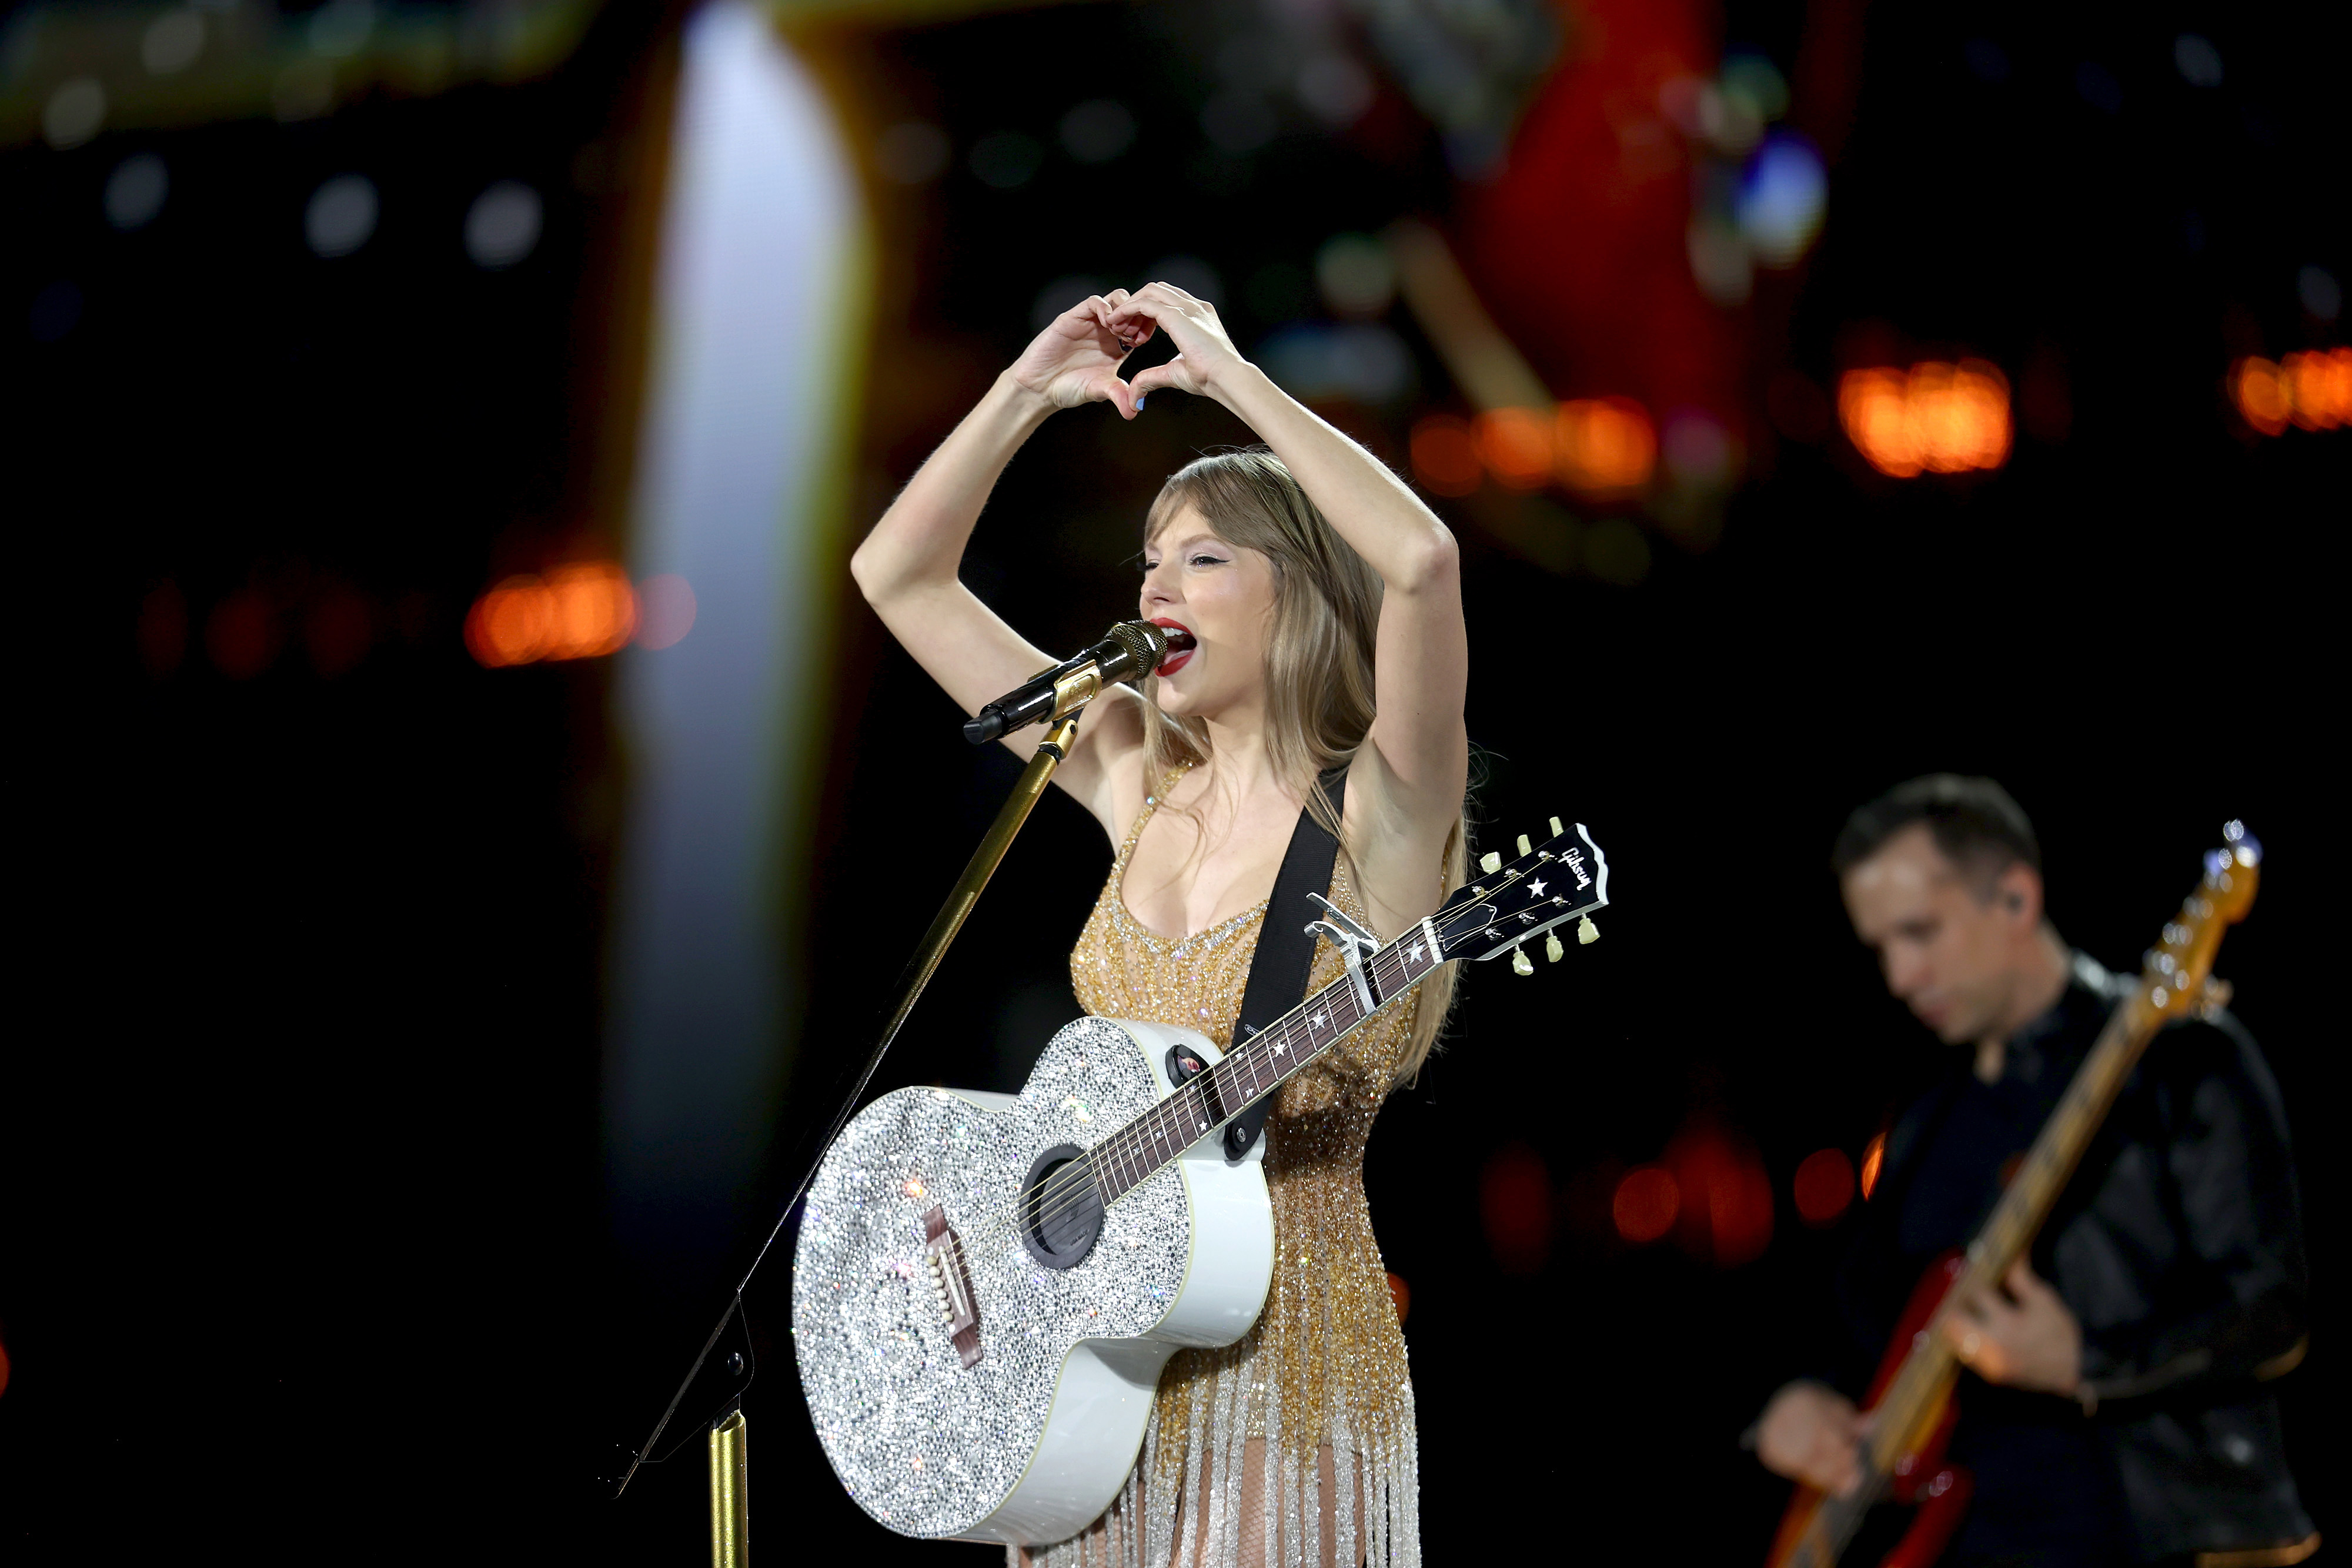 Close-up of Taylor performing with a guitar